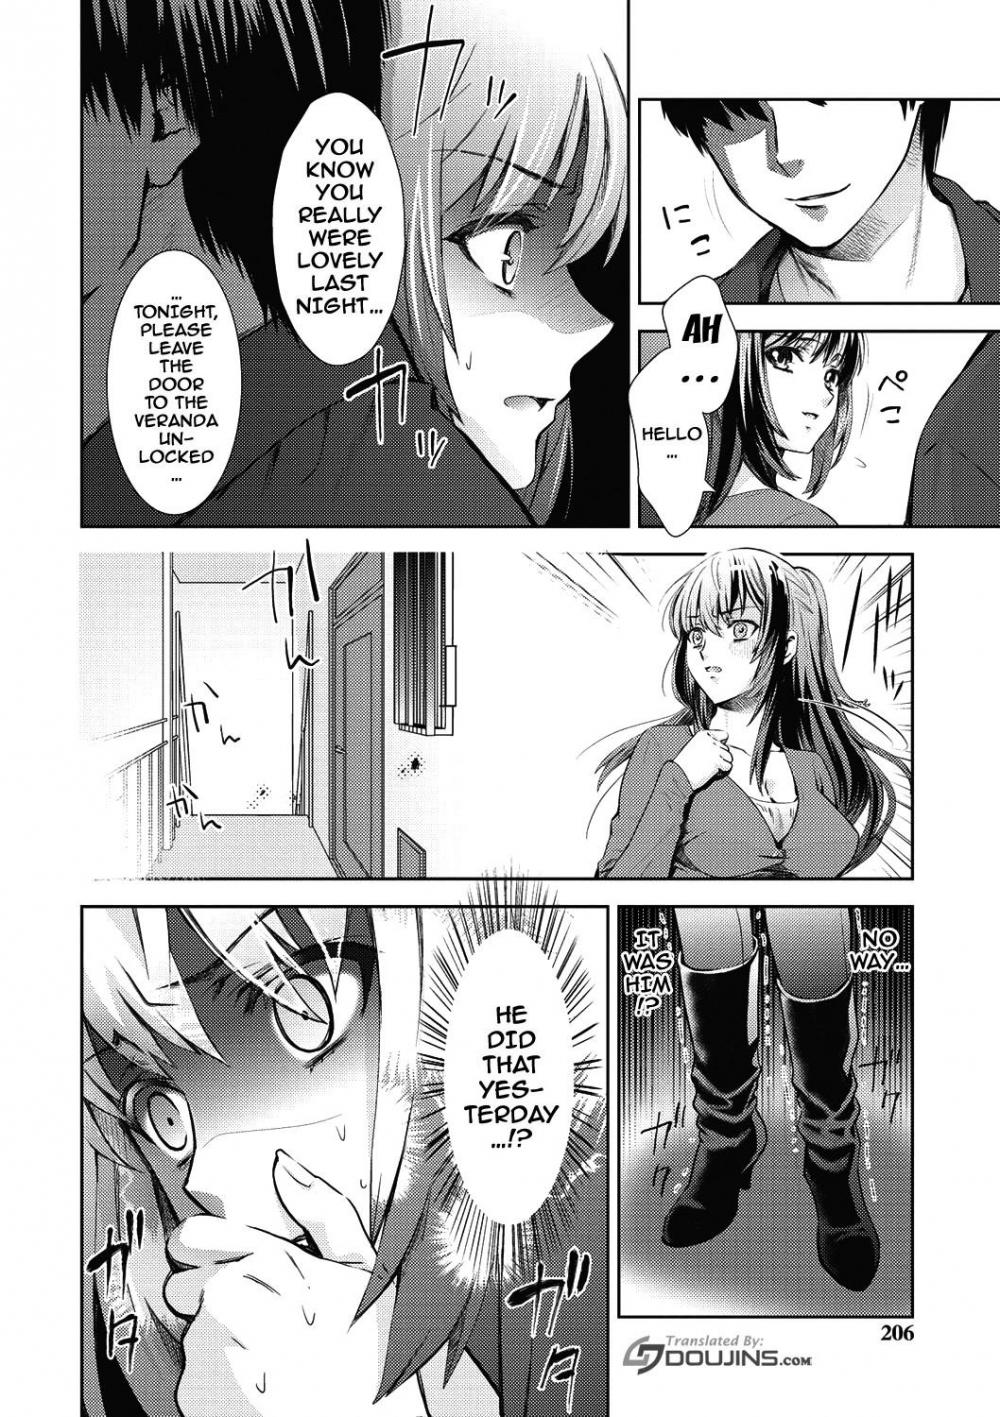 Hentai Manga Comic-From Now On She'll Be Doing NTR-Chapter 11-2